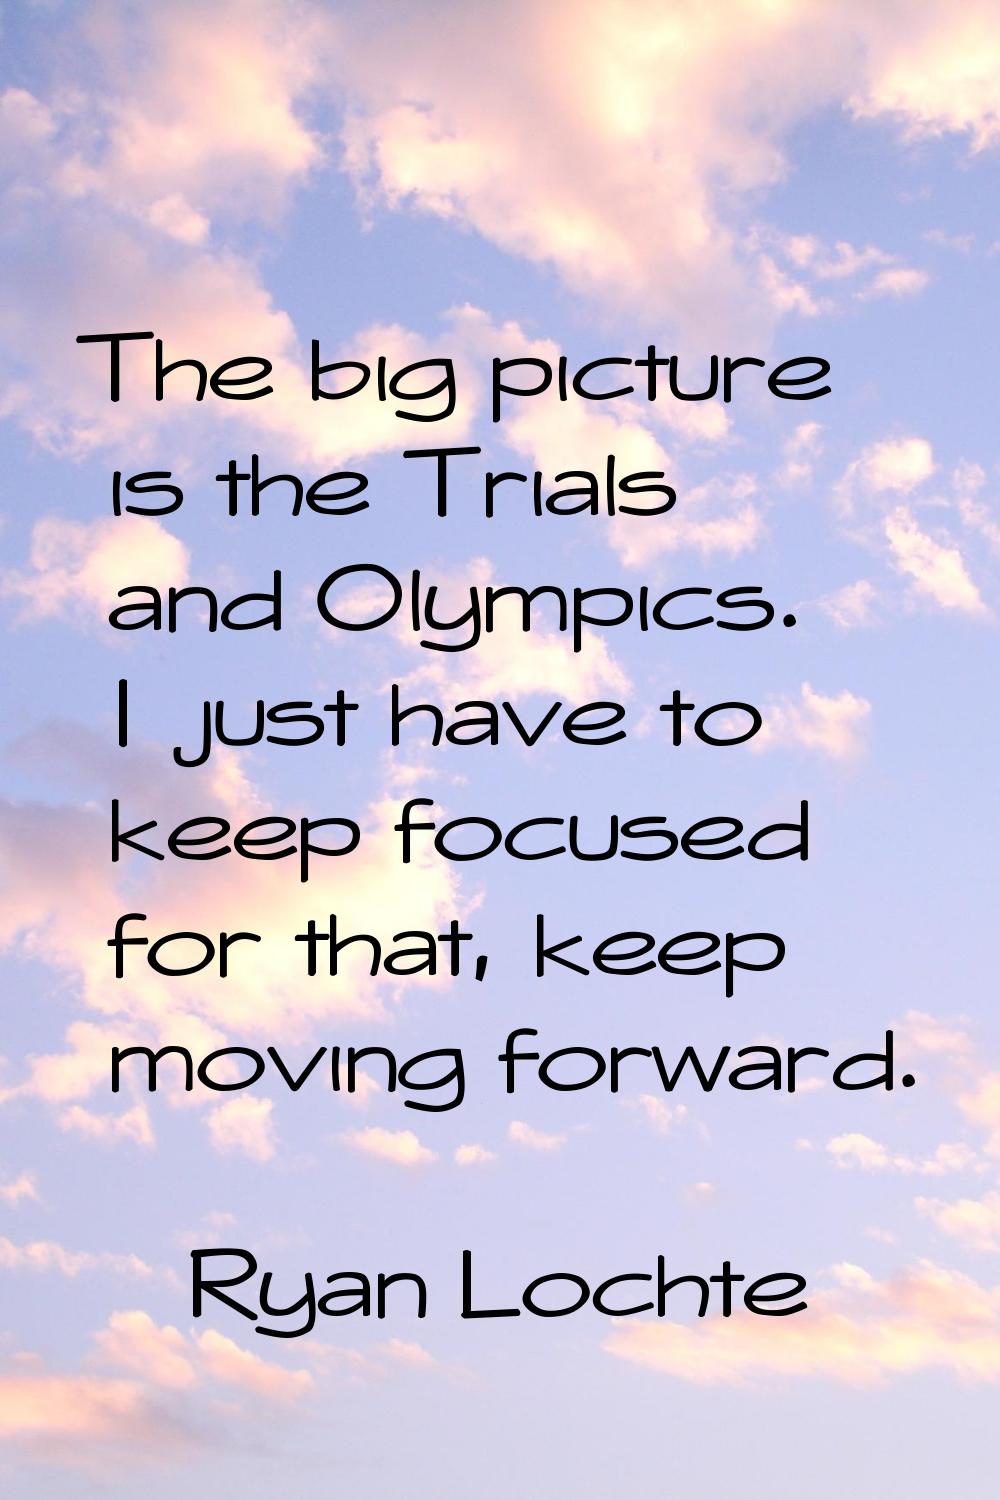 The big picture is the Trials and Olympics. I just have to keep focused for that, keep moving forwa